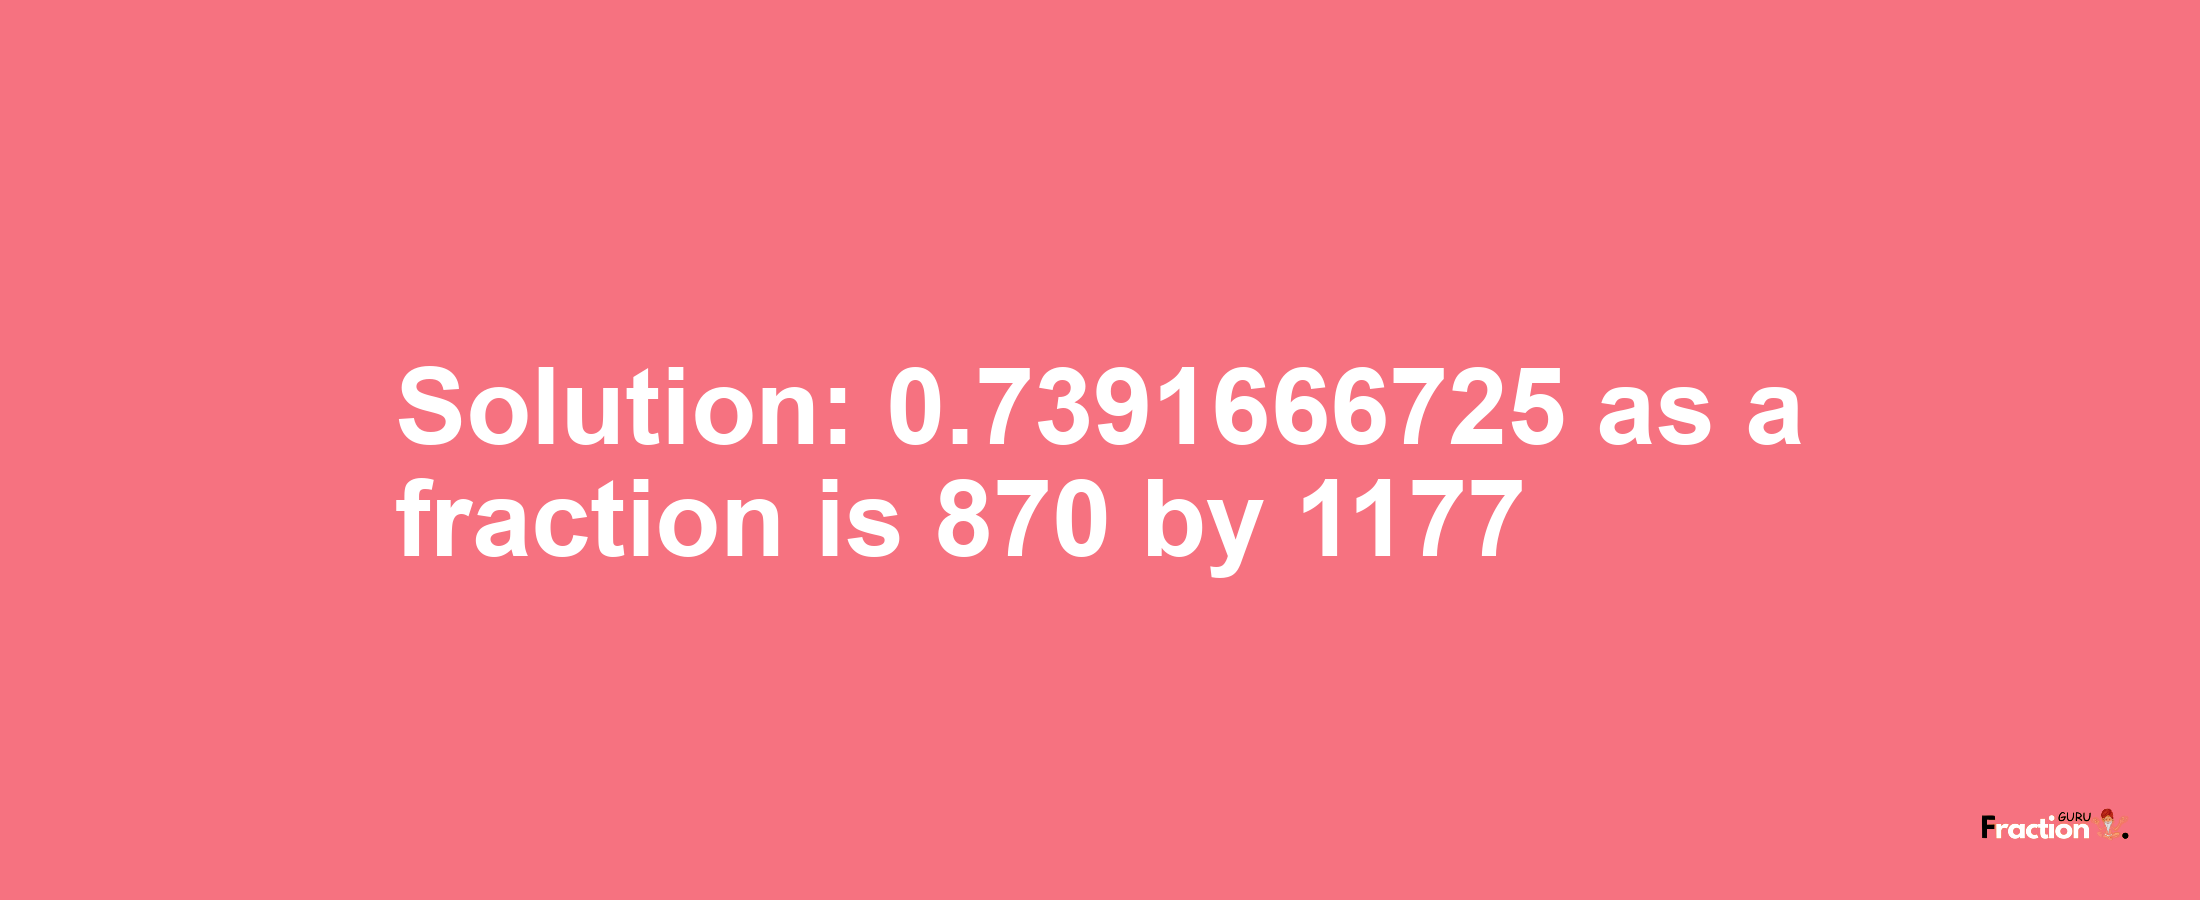 Solution:0.7391666725 as a fraction is 870/1177